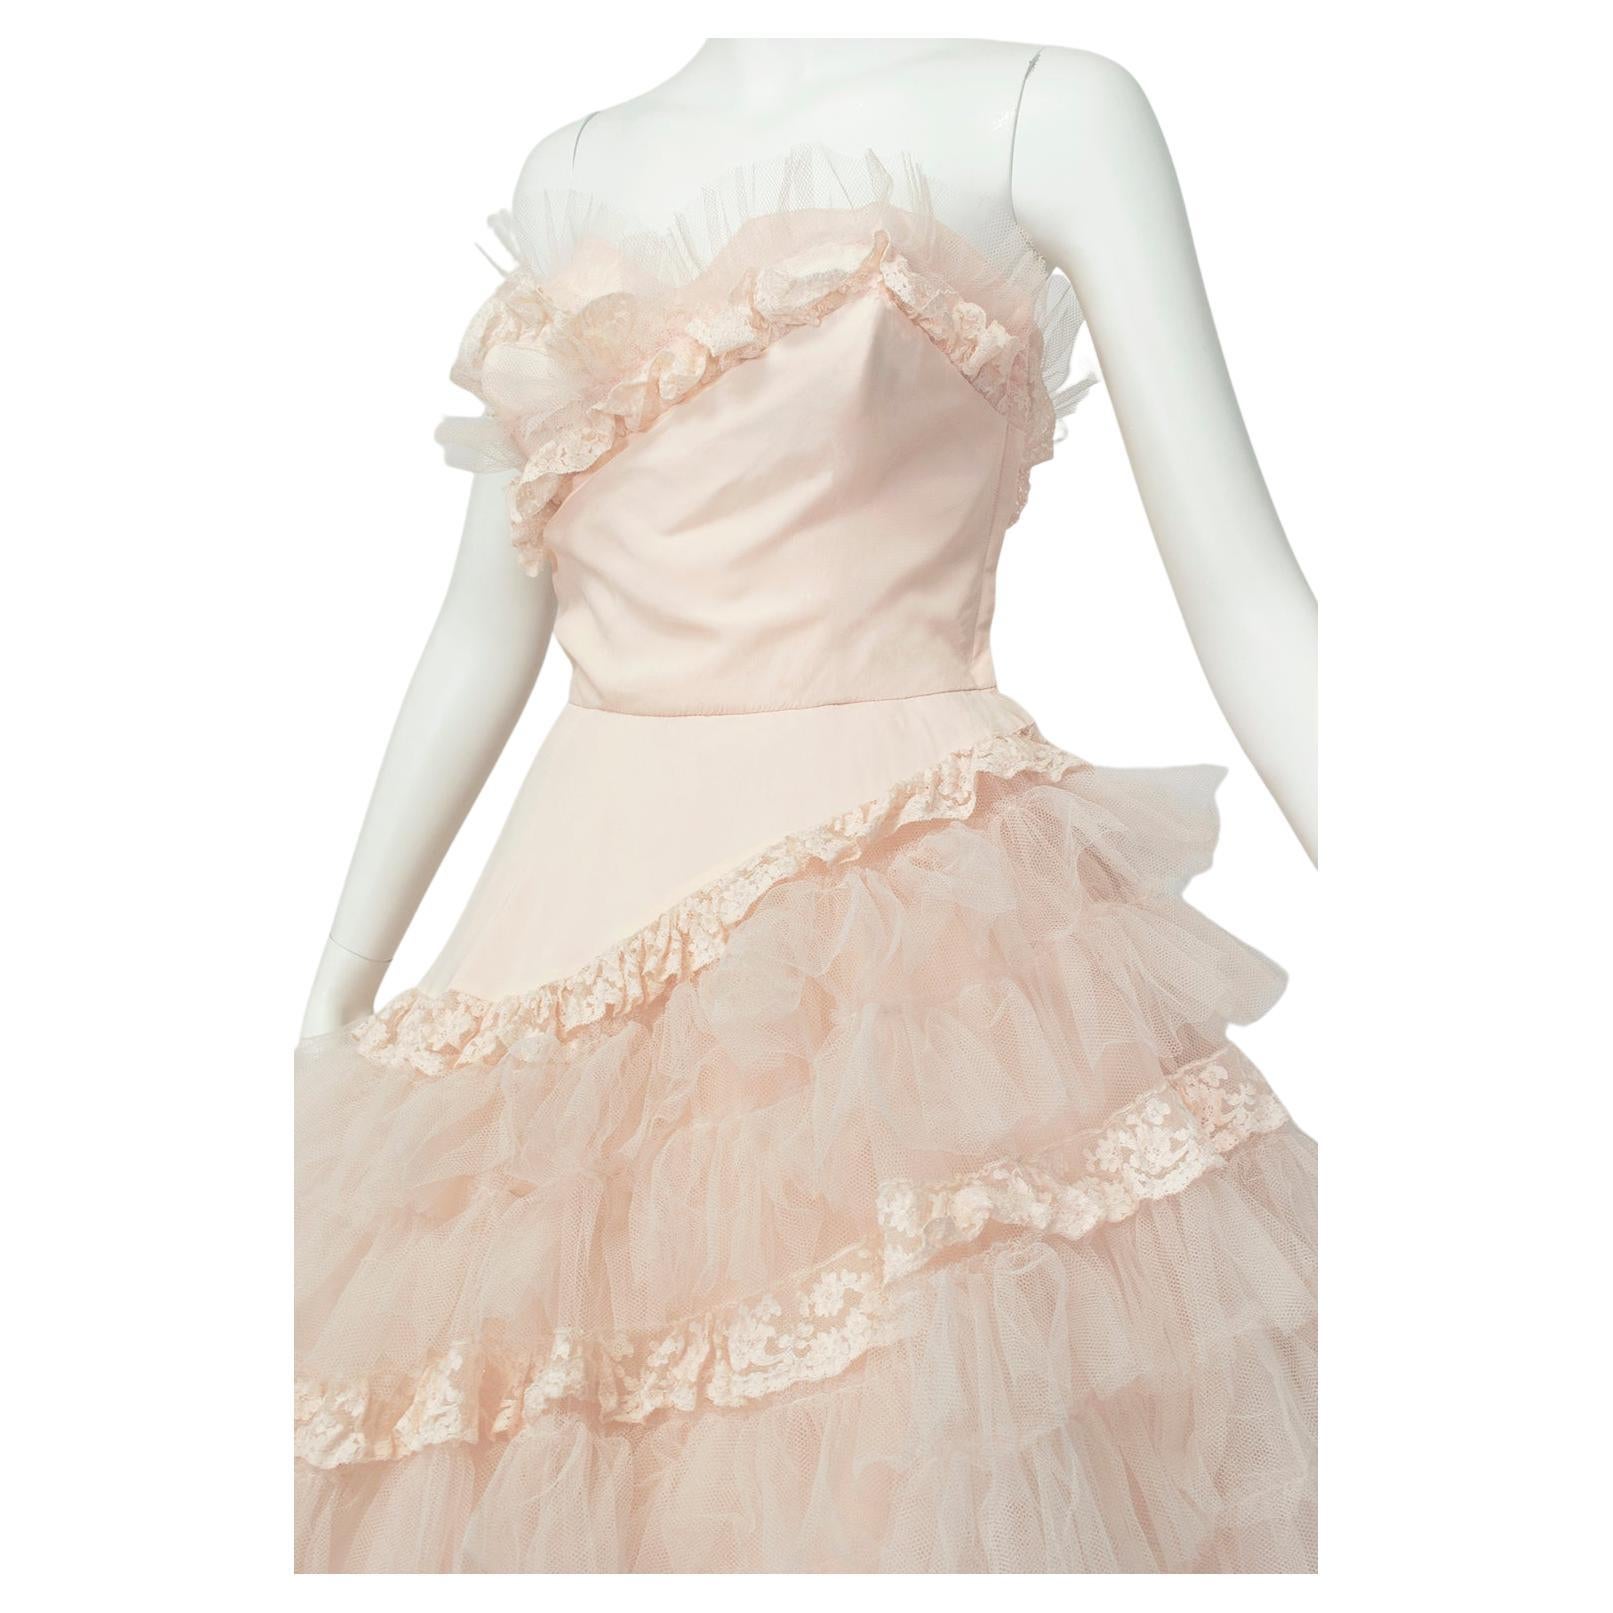 Will Steinman Pink Strapless Asymmetrical Lace Wedding Ball Gown - Small, 1950s 1